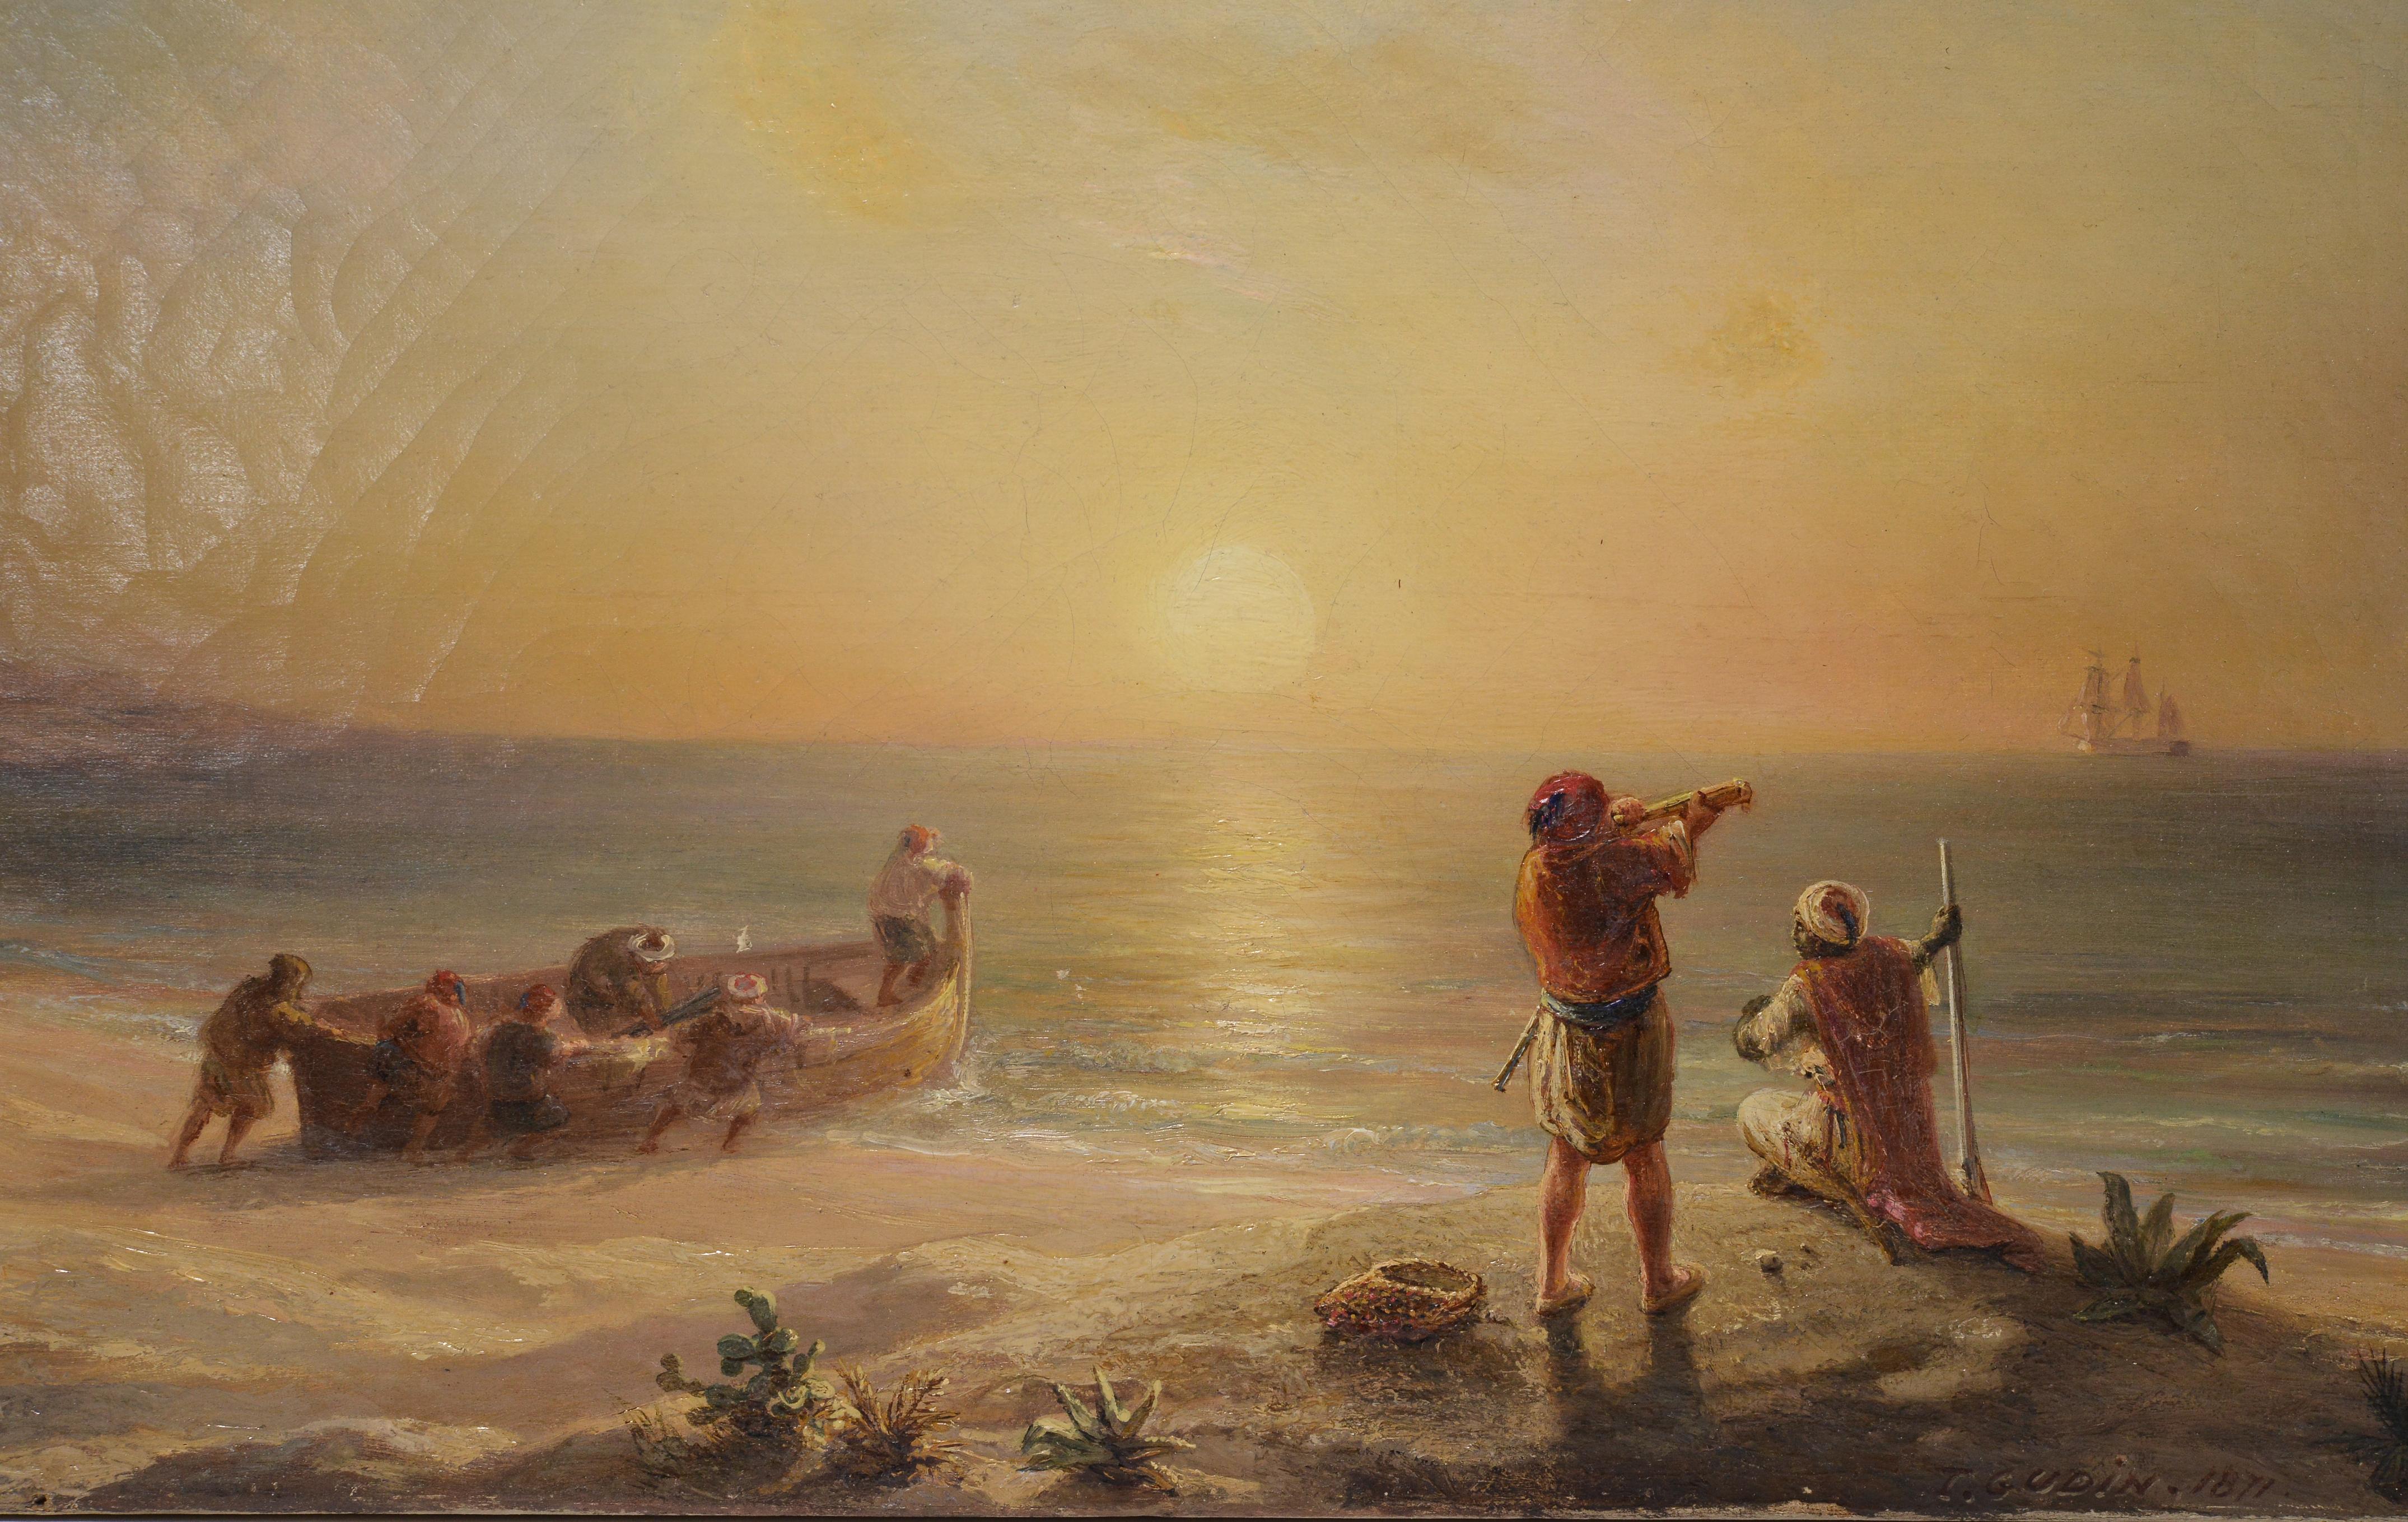 Smugglers at Algerian Coast 1871 Sunset Marine Scene Oil Painting by T. Gudin For Sale 4